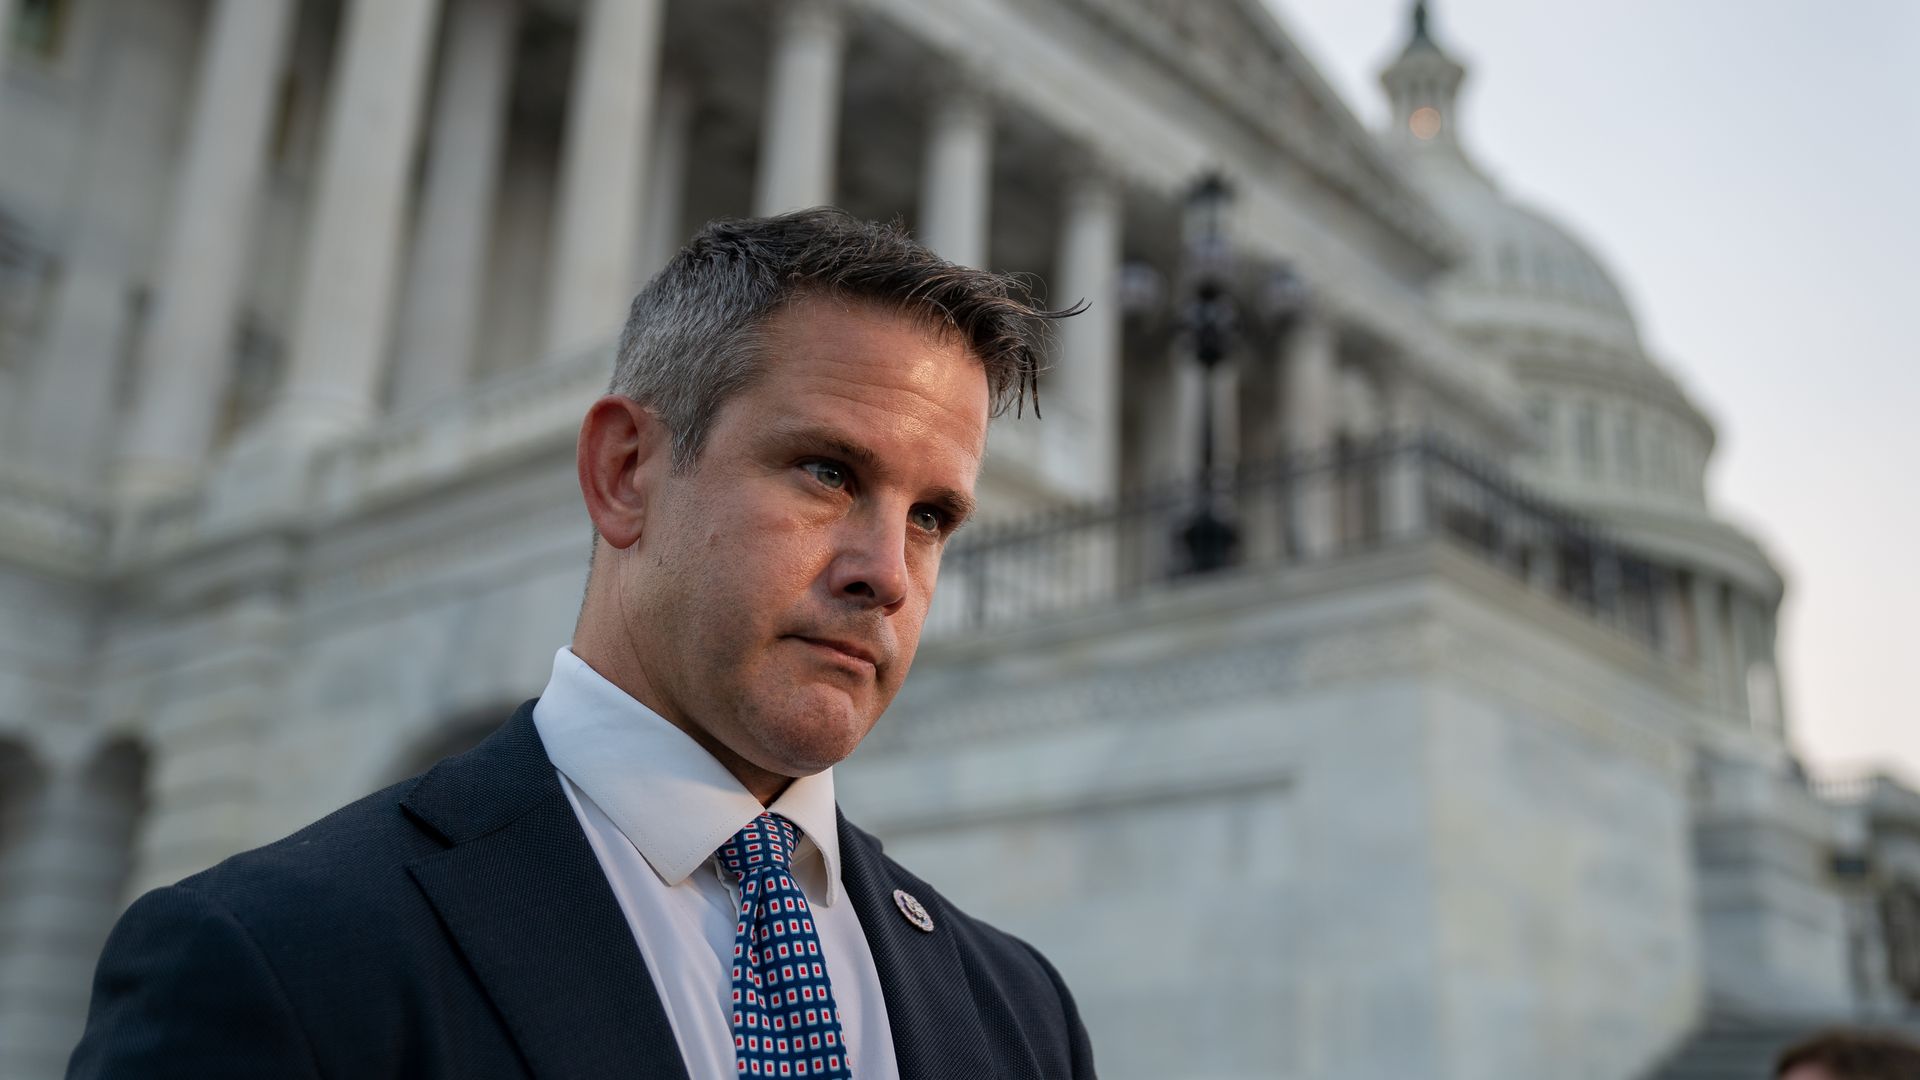 Representative Adam Kinzinger, a Republican from Illinois, speaks to members of the media outside the U.S. Capitol in Washington, D.C., U.S., on Monday, Aug. 23